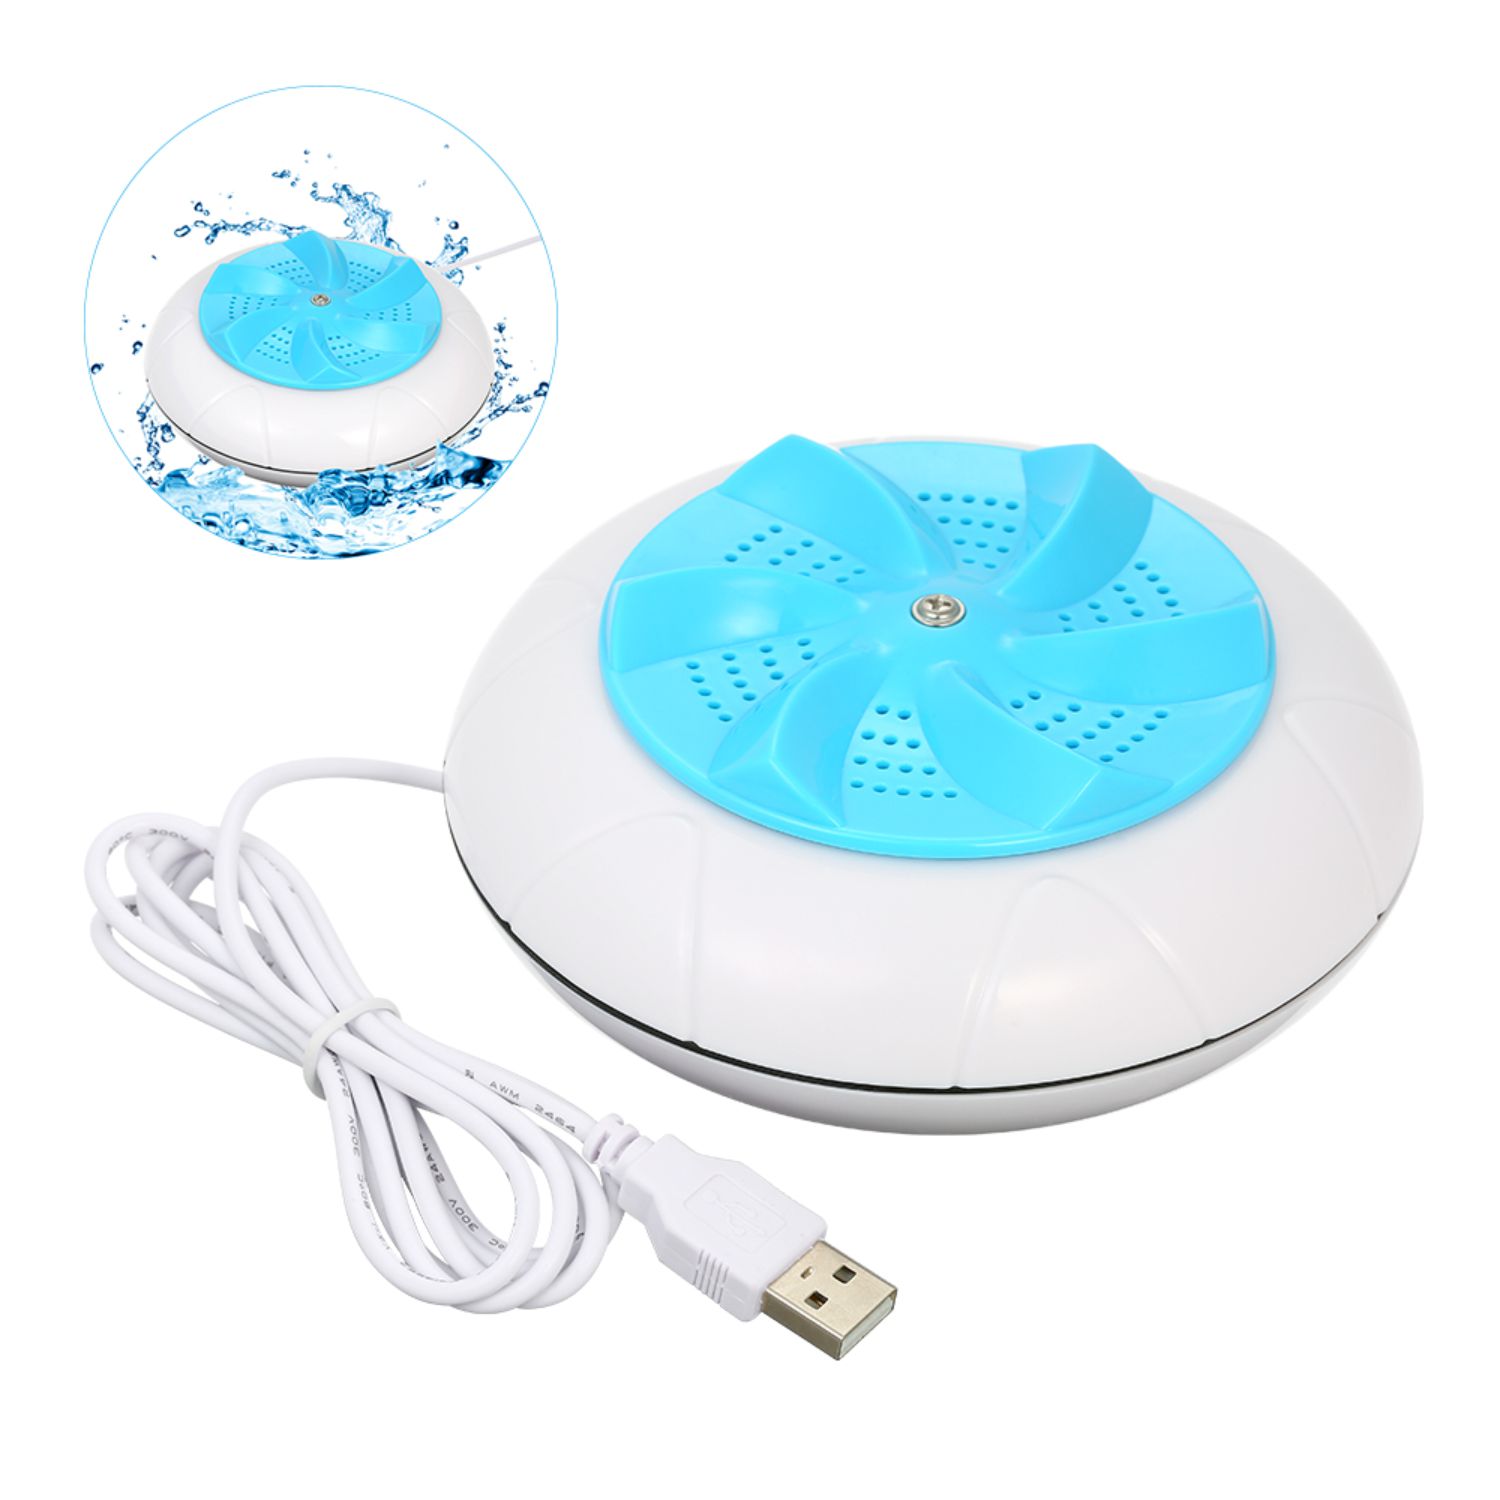 Mini Portable Washing Machine for Sink,27W USB Power Supply, Ultrasonic  Turbo Small Washer for Travelling,Business Trip,College Room.Turbine